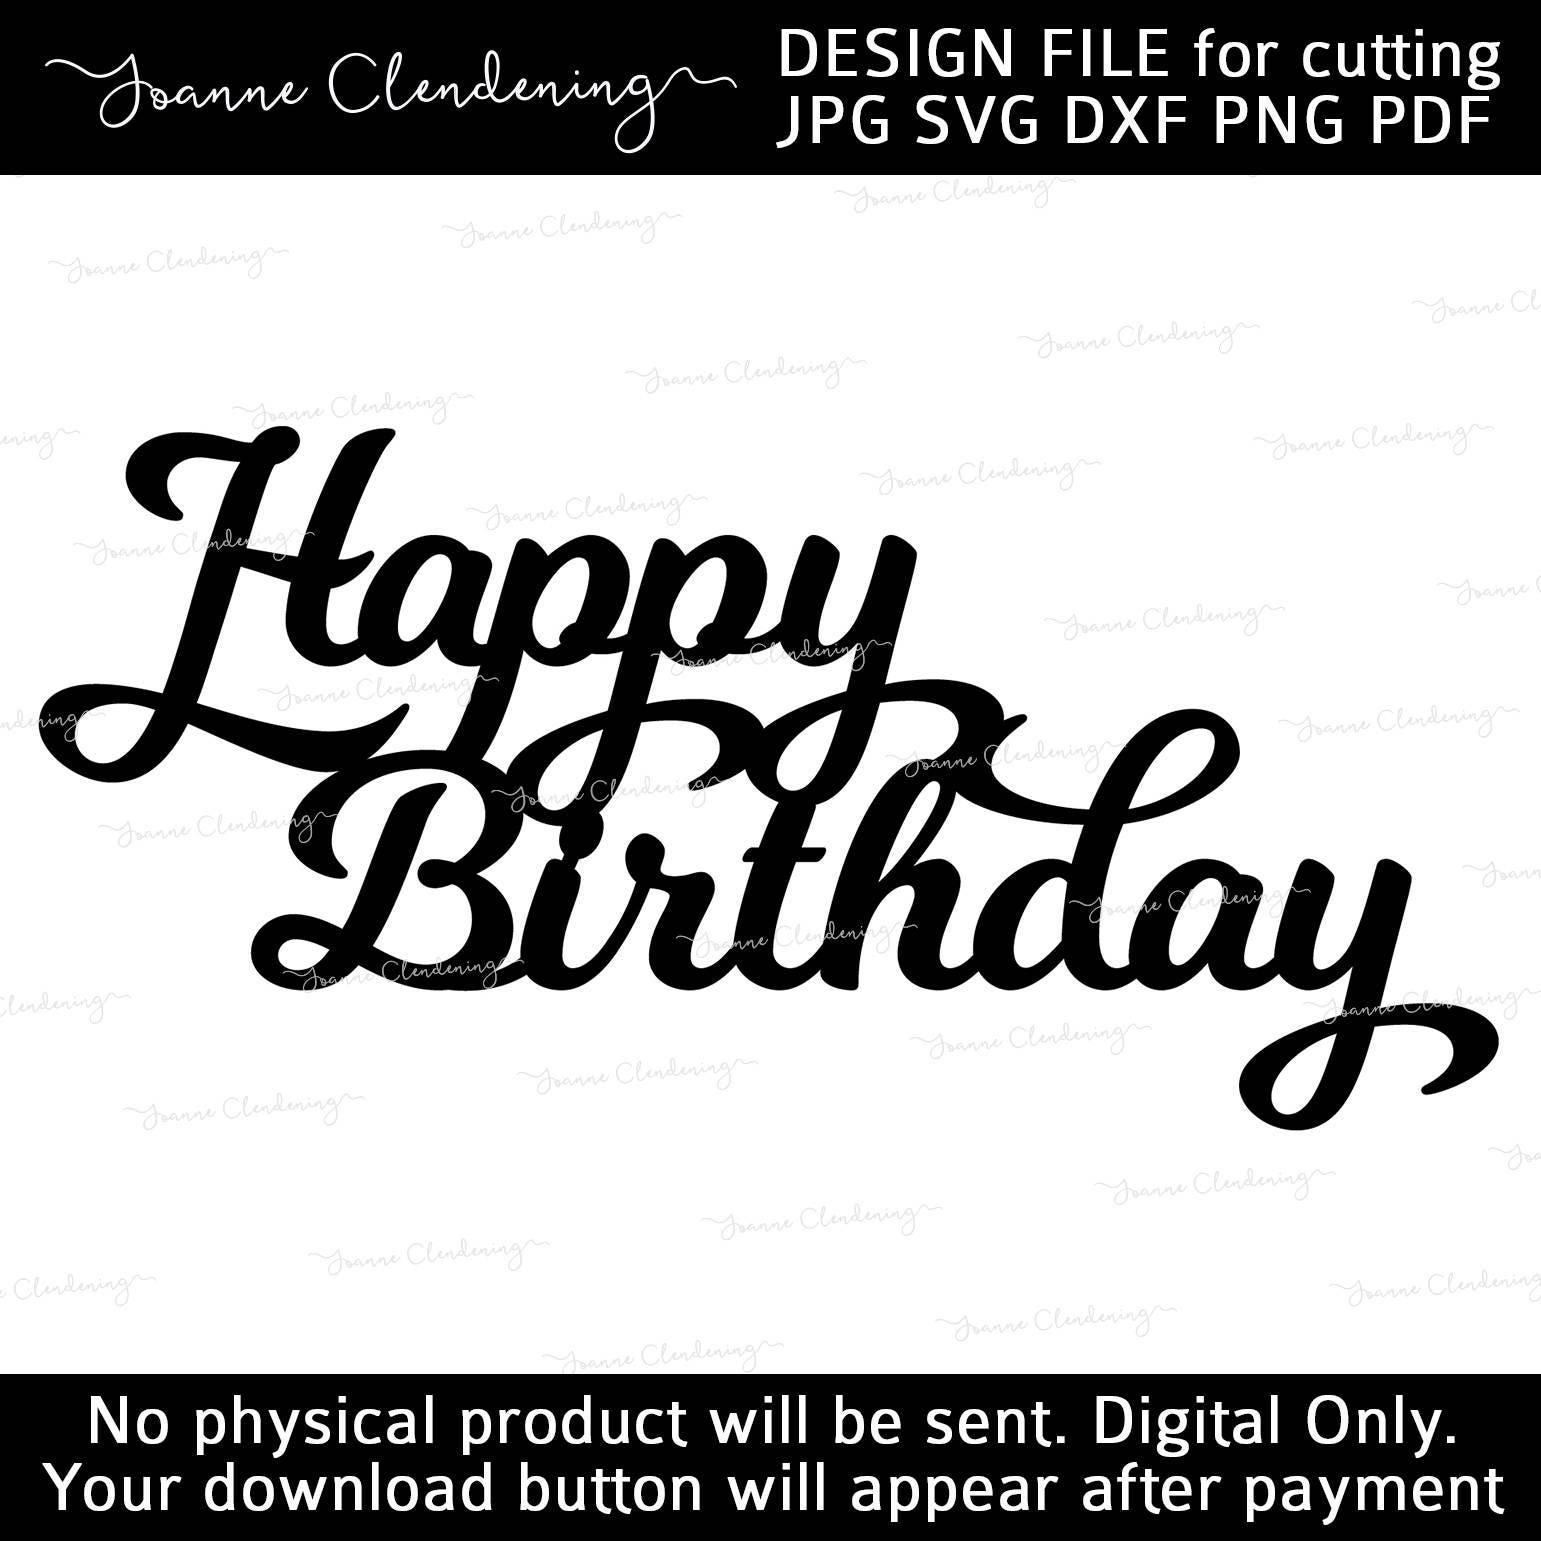 Happy Birthday letters joined design cut files - SVG - DXF - png - jpg ...